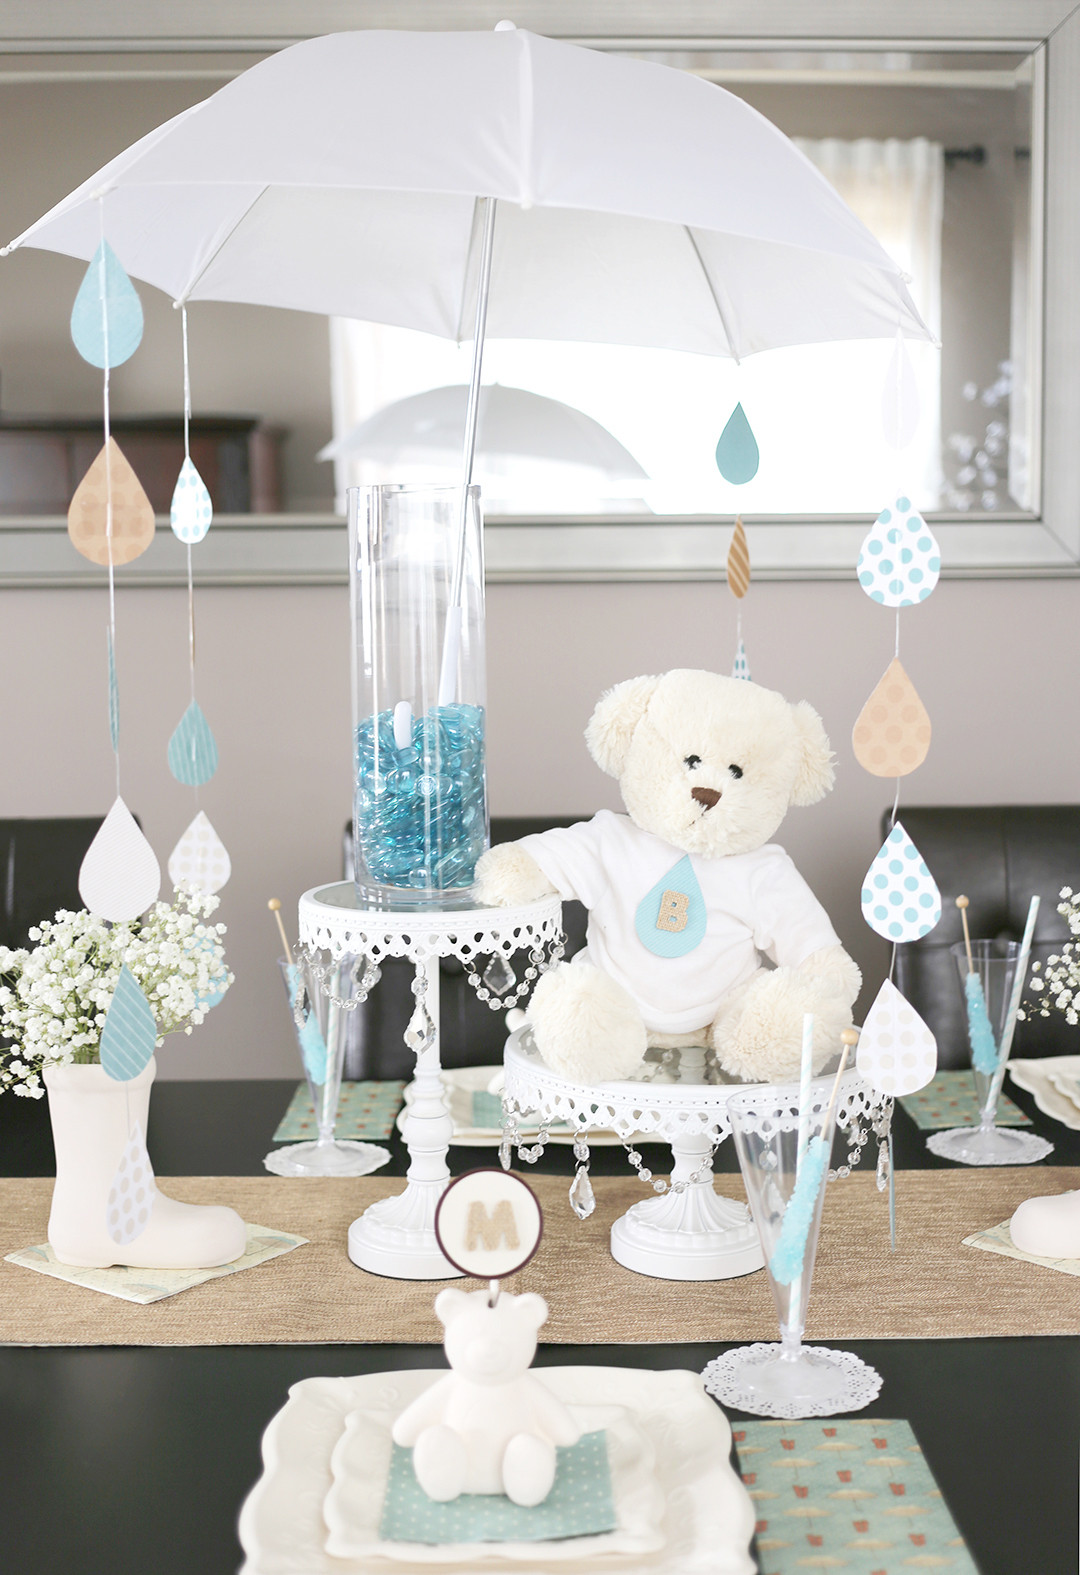 Baby Shower Centerpieces DIY
 A Sweet Umbrella Themed Baby Shower